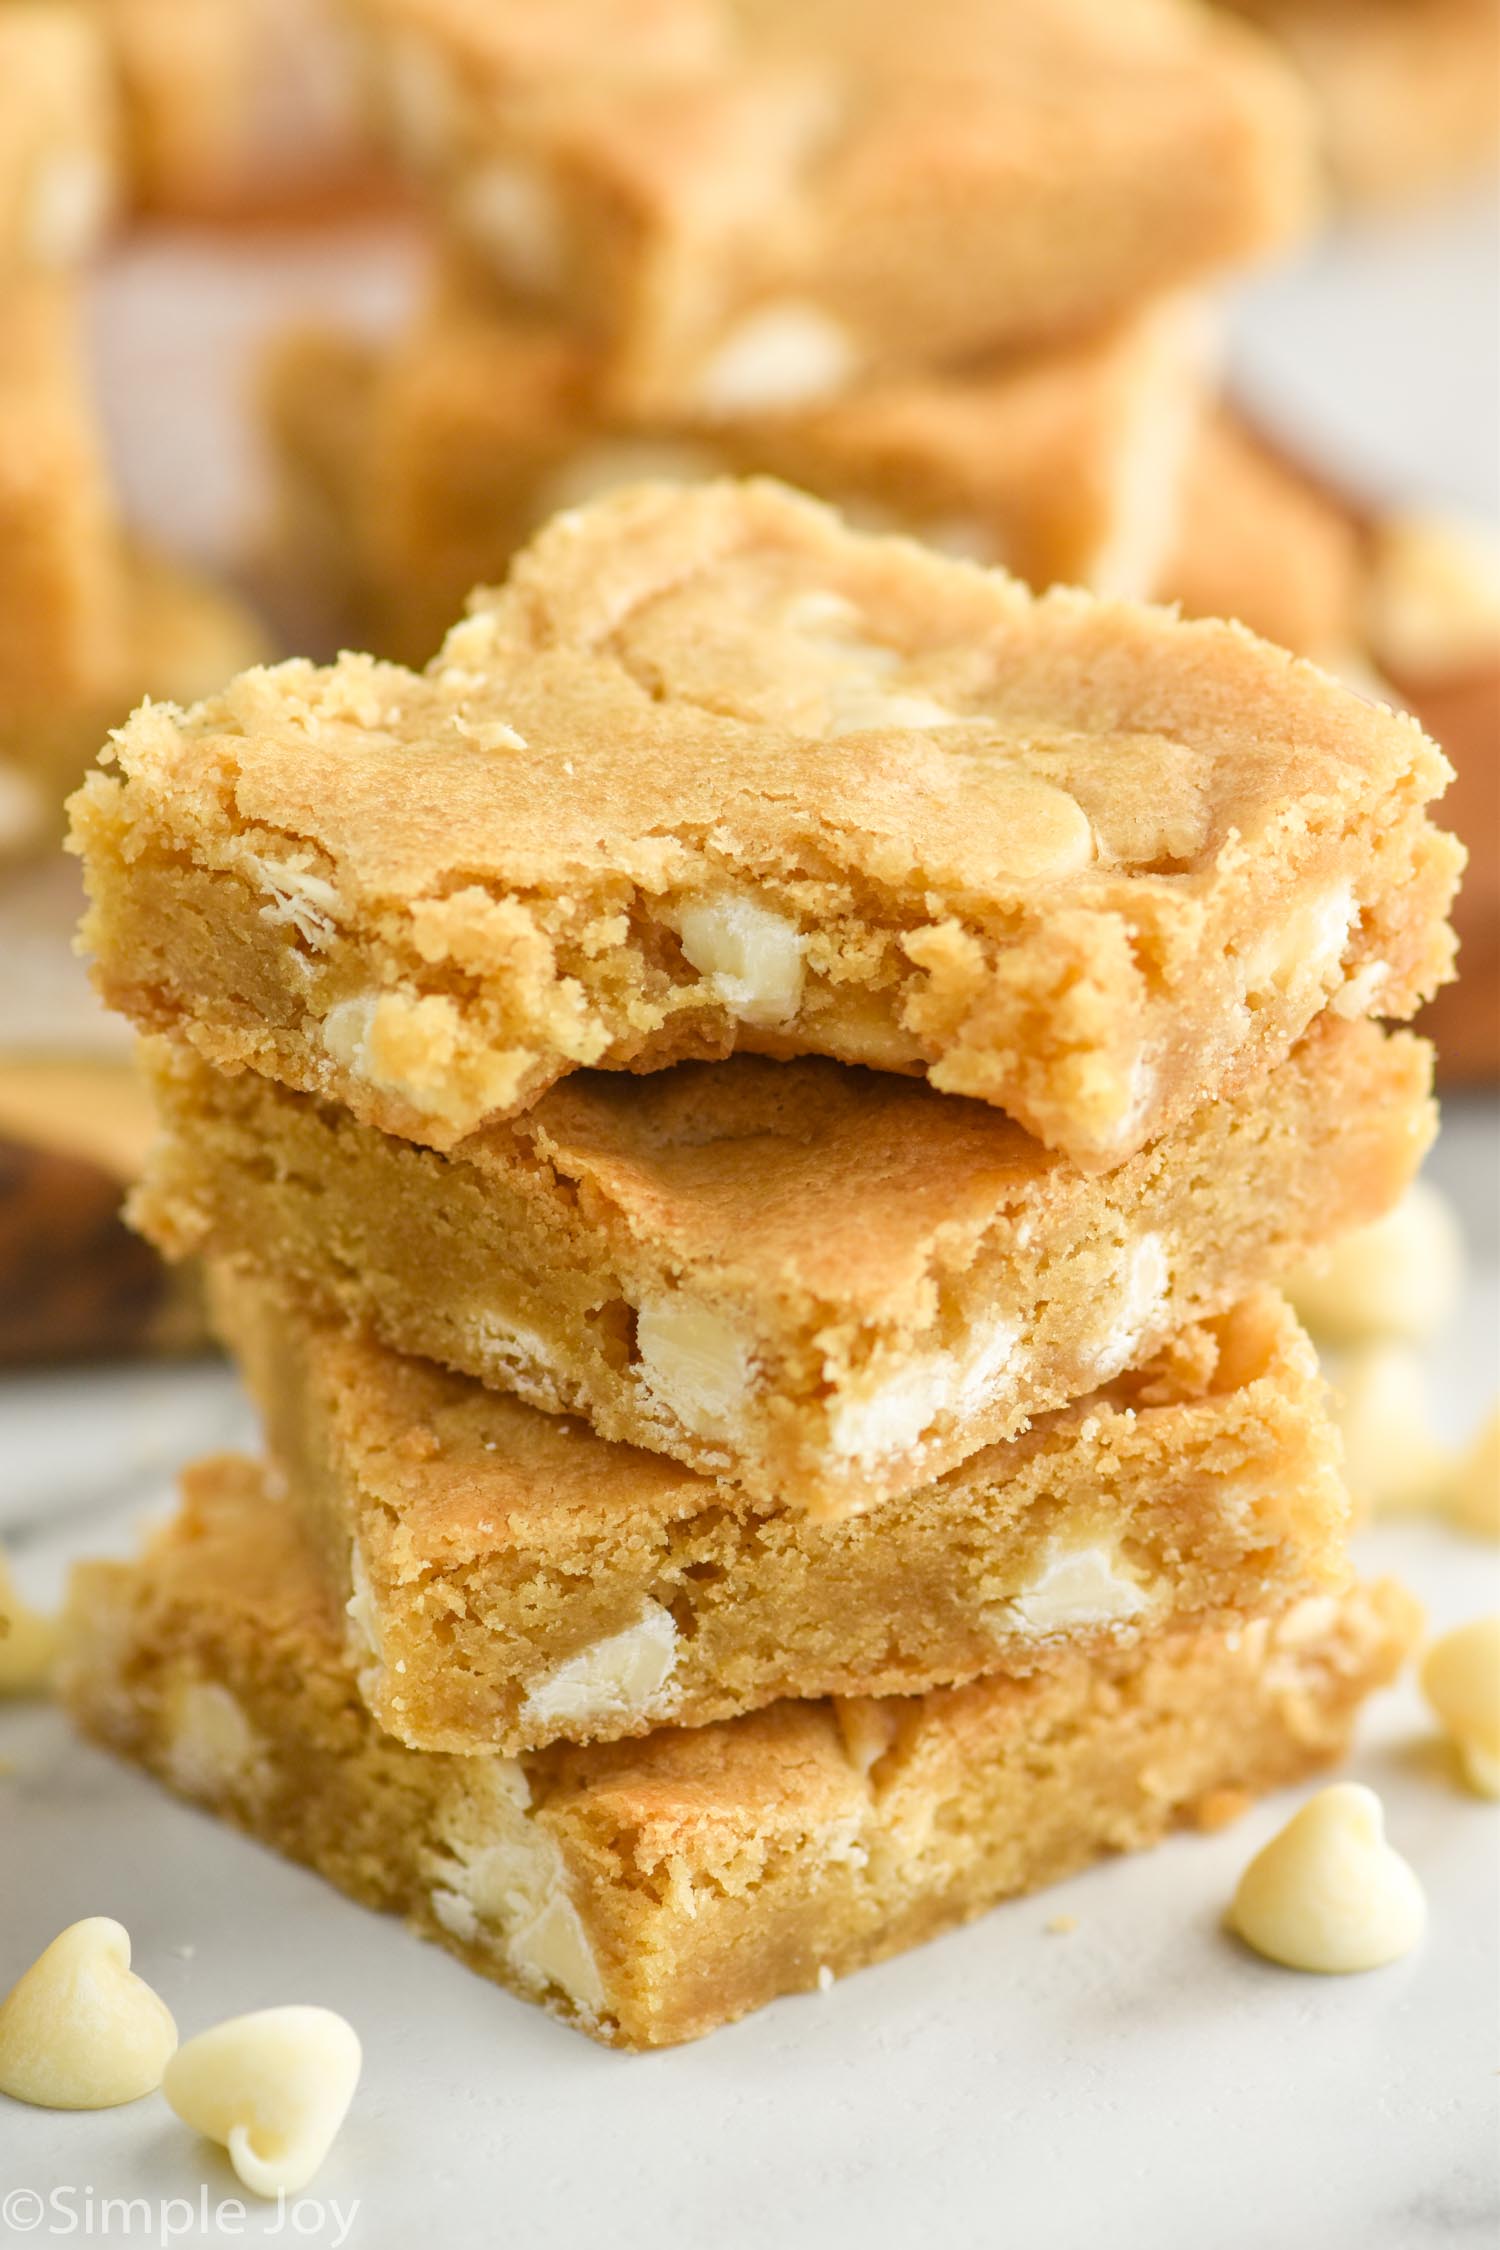 Side view of a stack of Blondie brownies with a bite taken out of the top brownie. White chocolate chips beside stack.